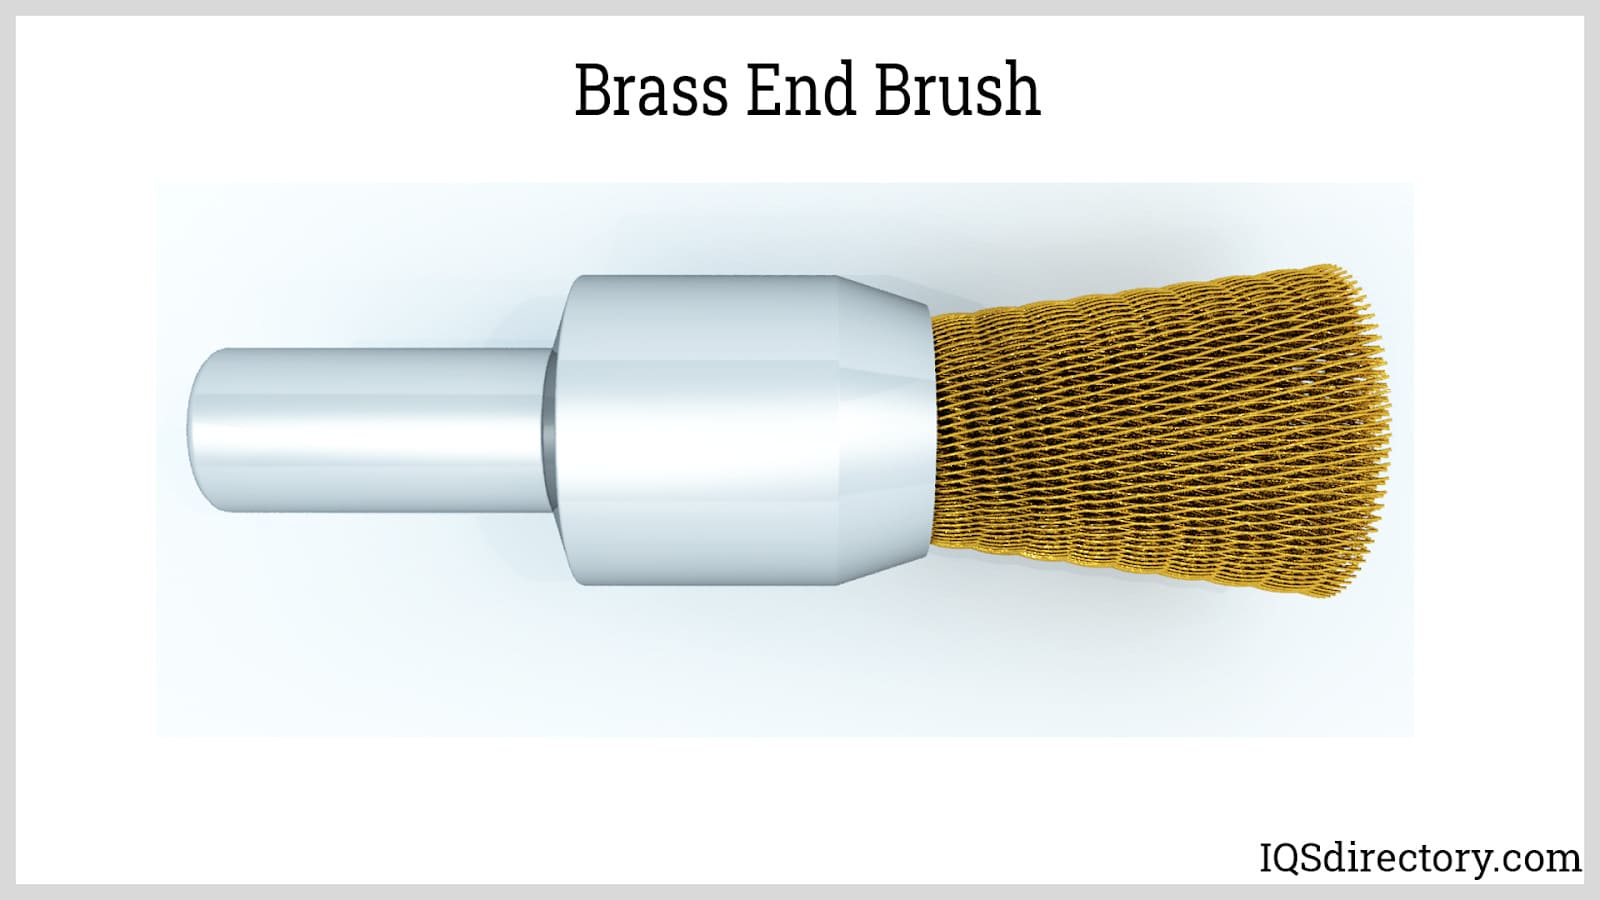 Bristled by wire brushes? Here are alternatives for cleaning your